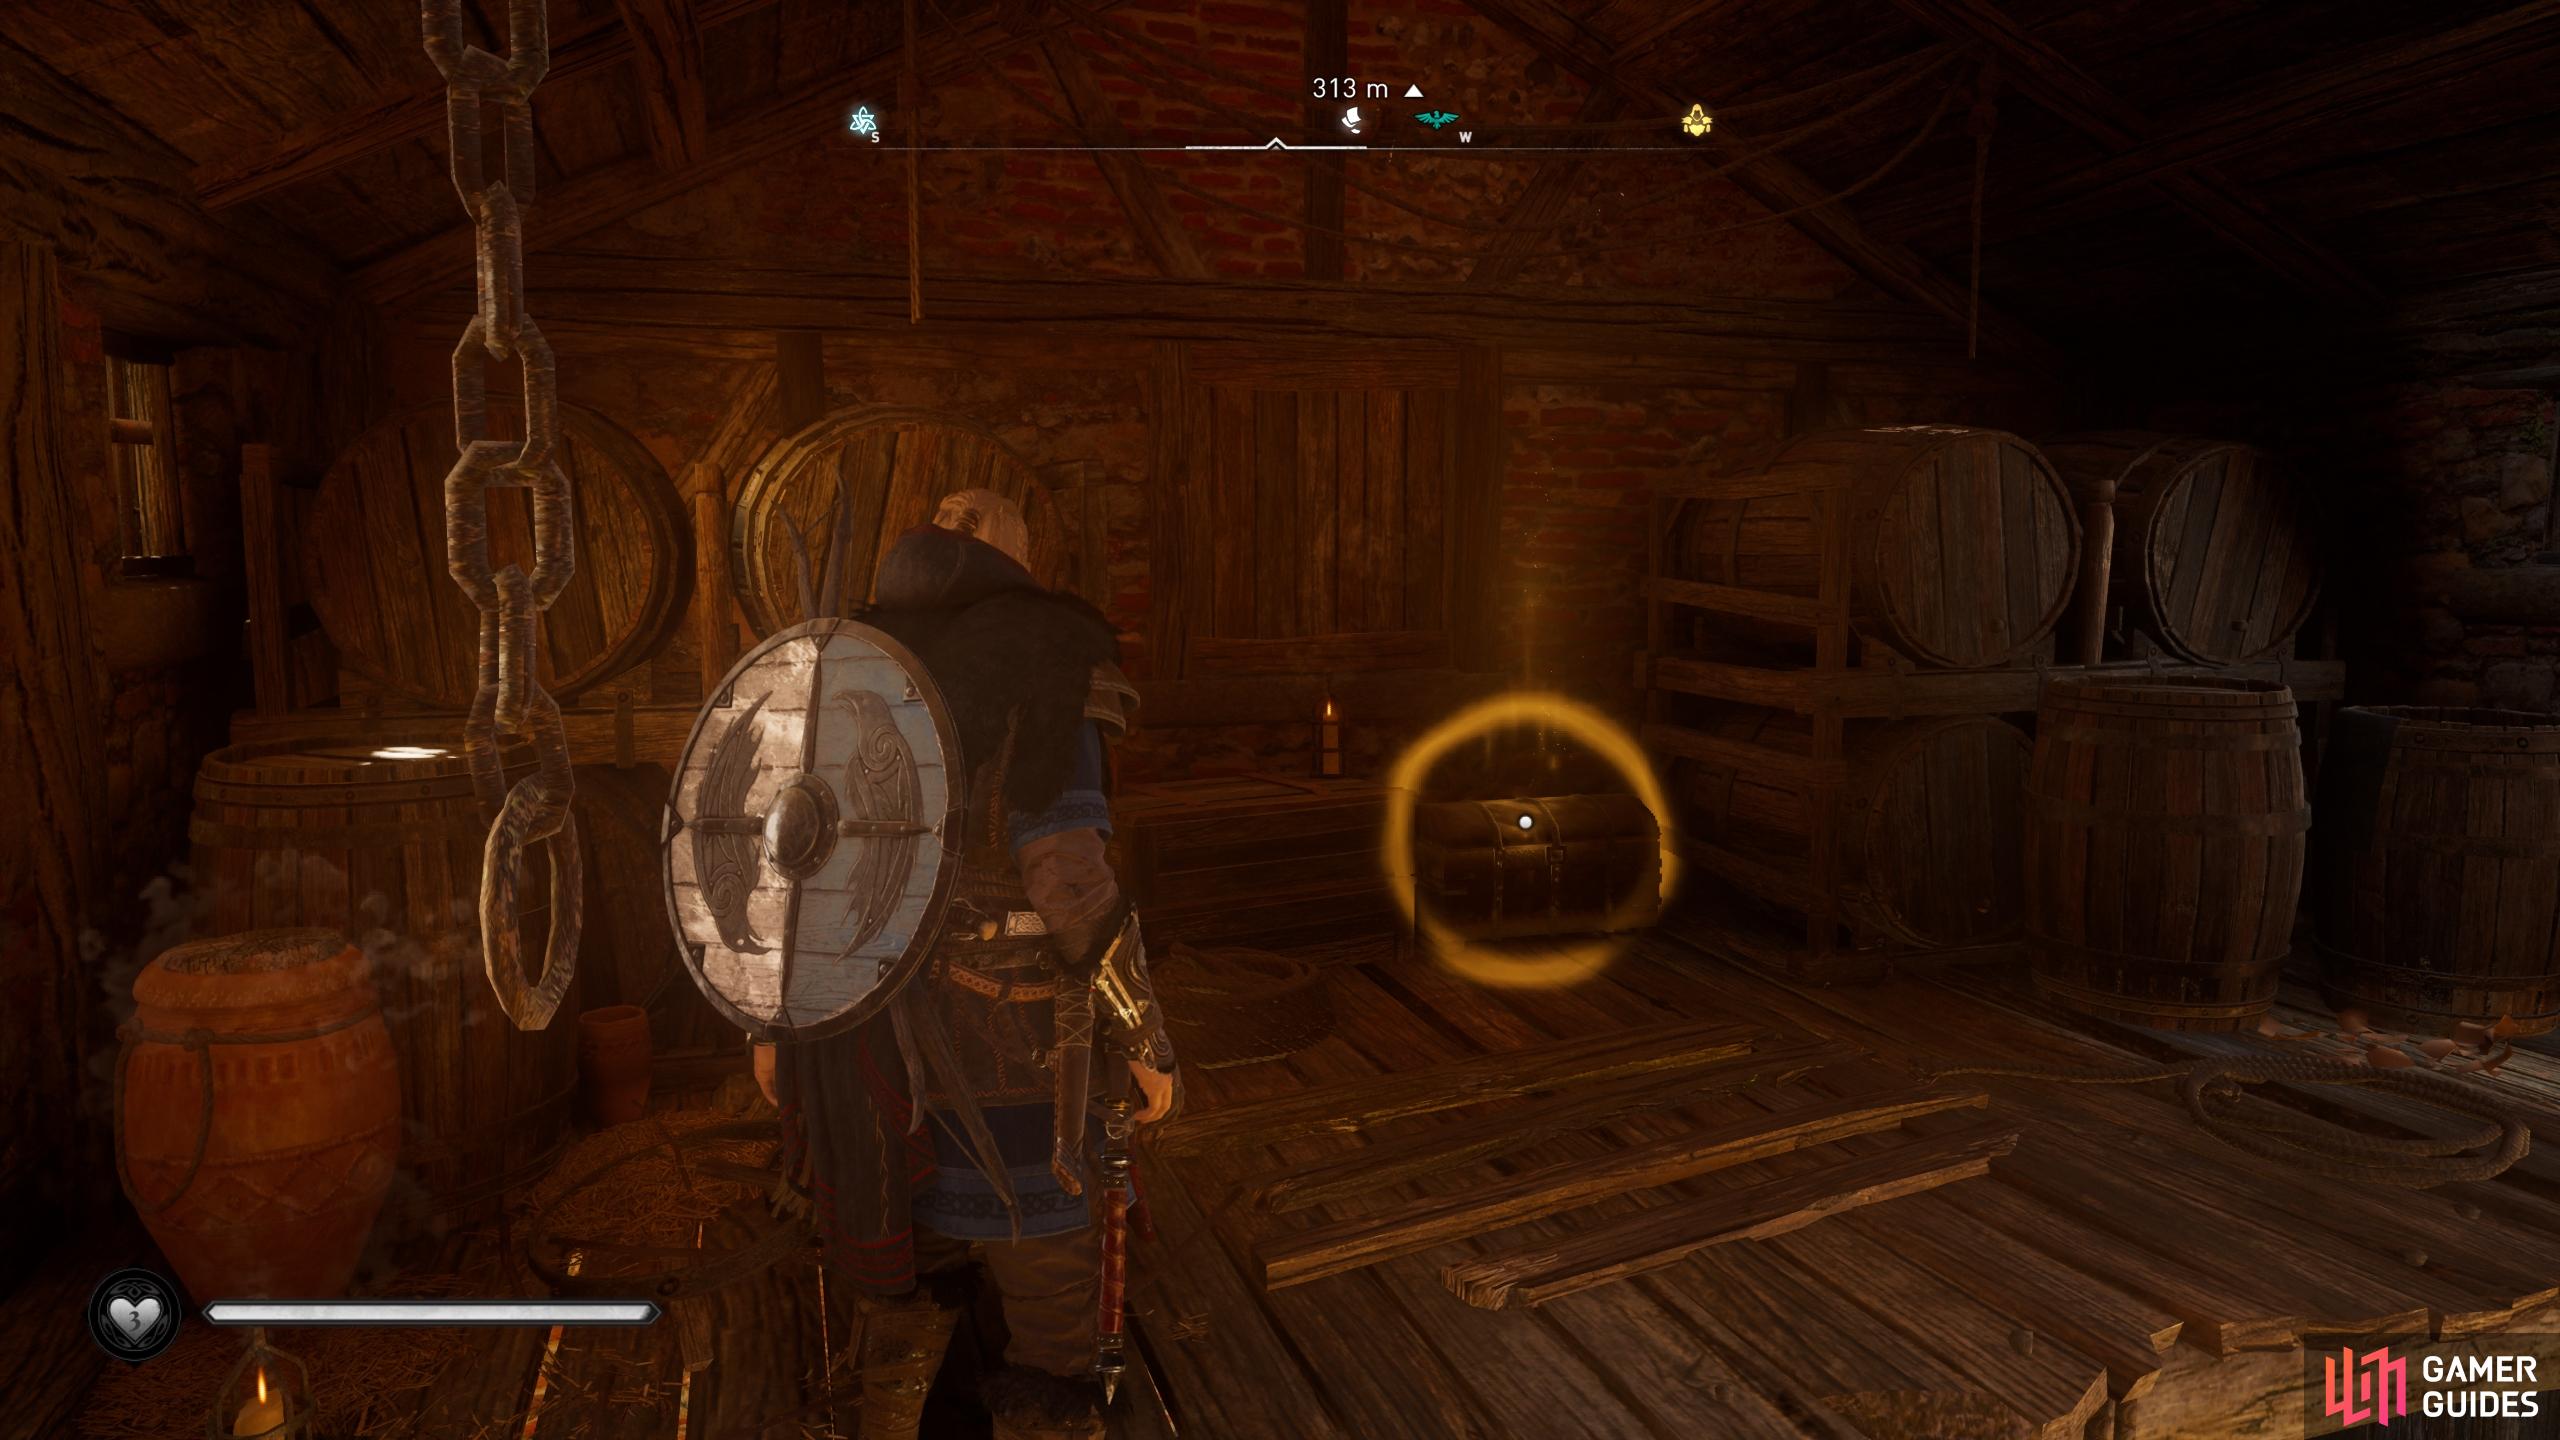 You'll find minor treasure chests in many buildings throughout the game world, often containing large amounts of silver.